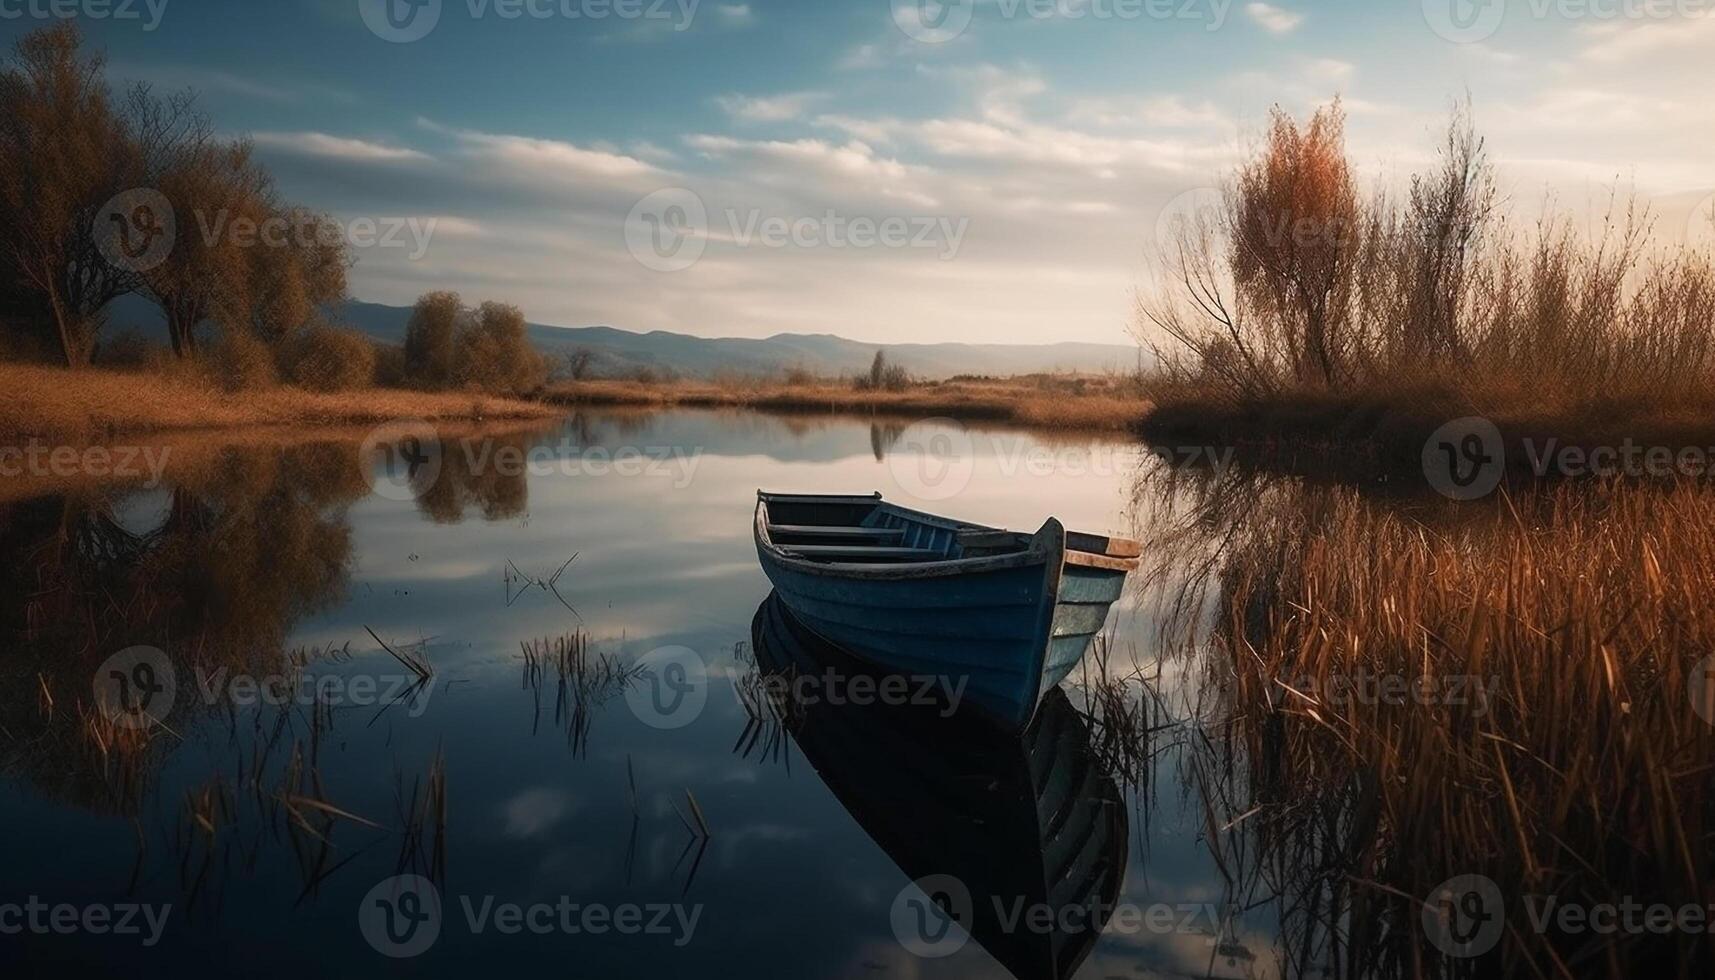 Tranquil scene of an abandoned rowboat on a peaceful pond generated by AI photo